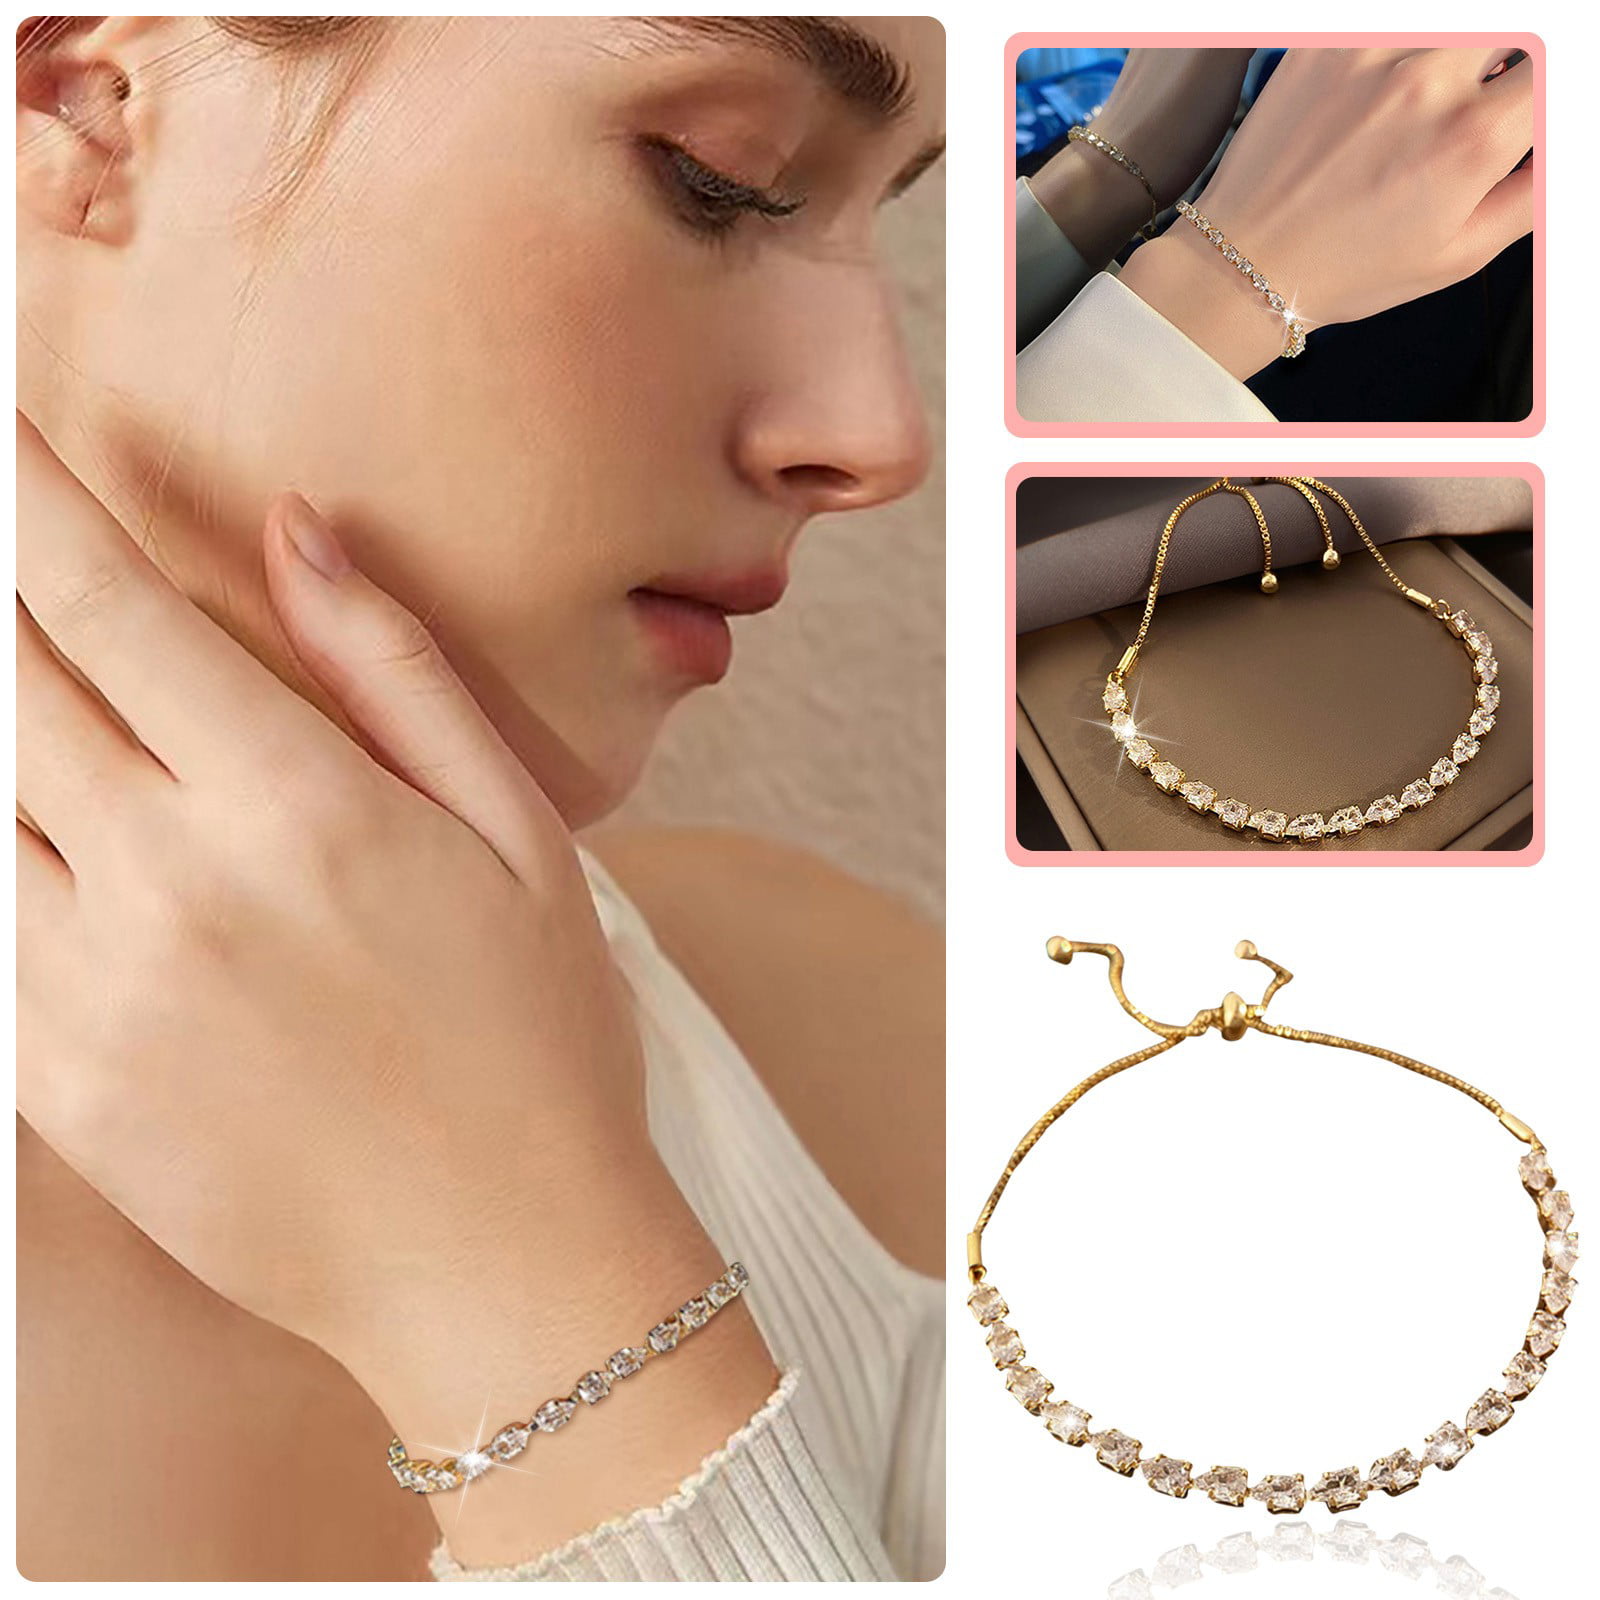 Jewelry Bracelets Water Drop Shaped Rhinestone Bracelet The Gift For  Friends Sisters And Girls Let Gold Bracelet Witness Your Beautiful Friends